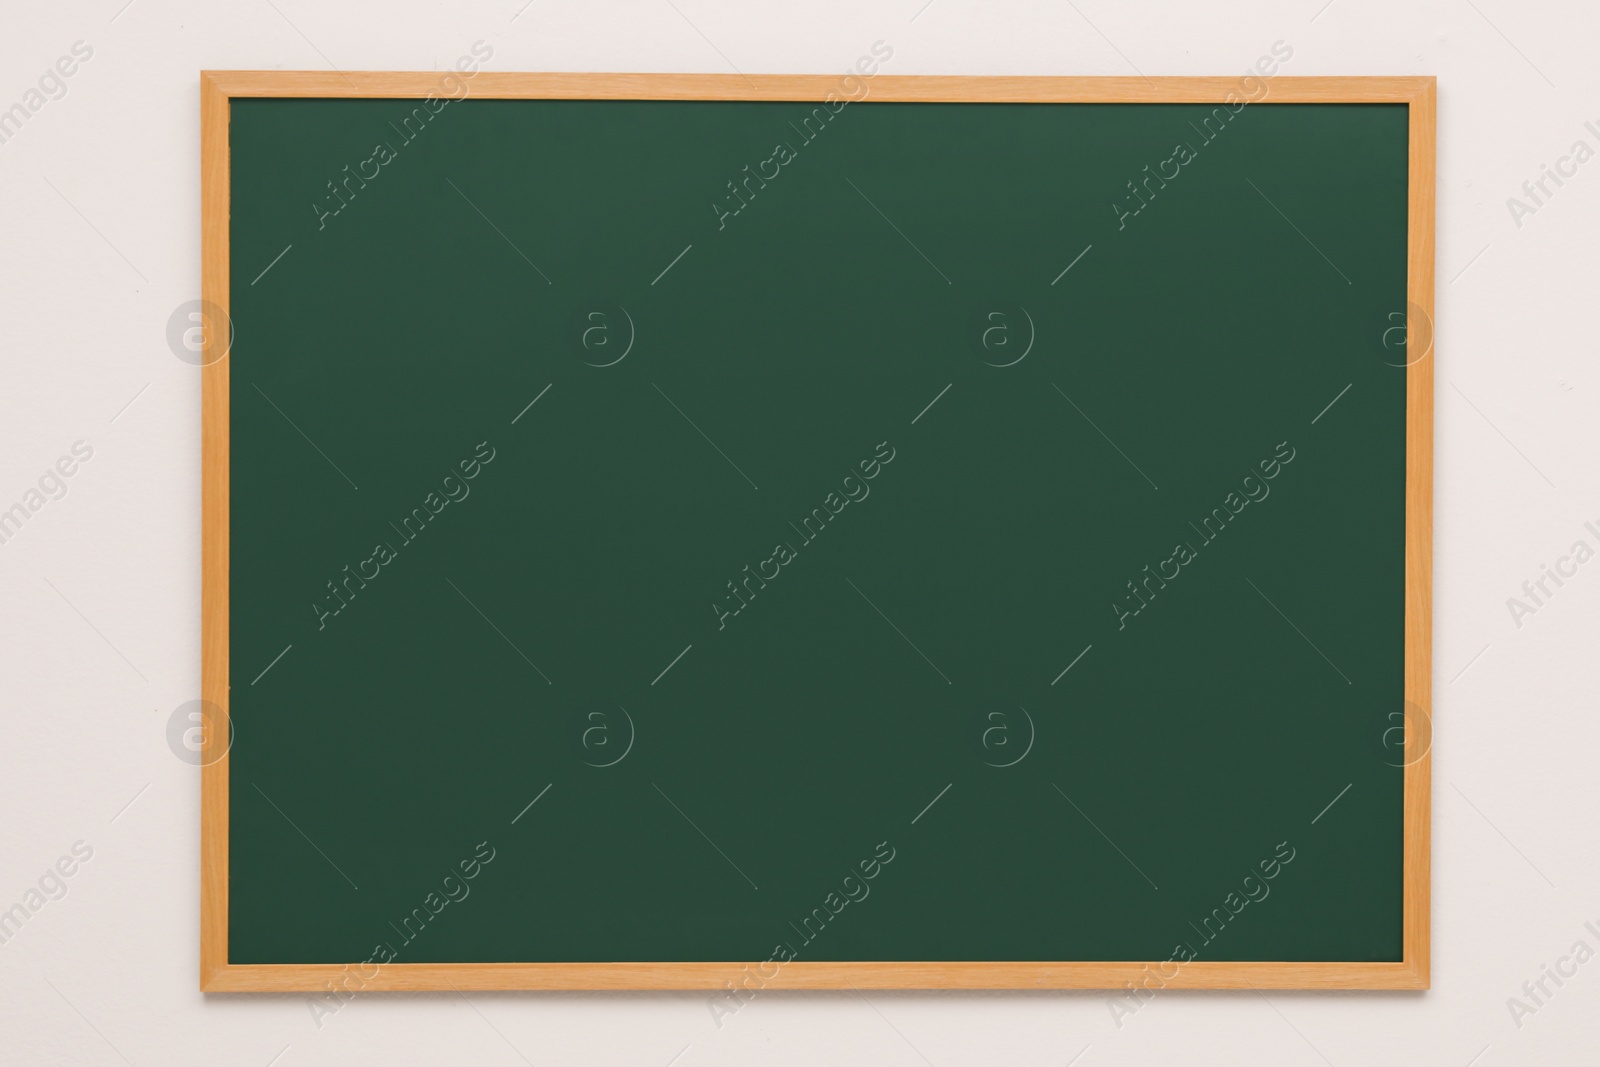 Photo of Clean green chalkboard hanging on grey wall